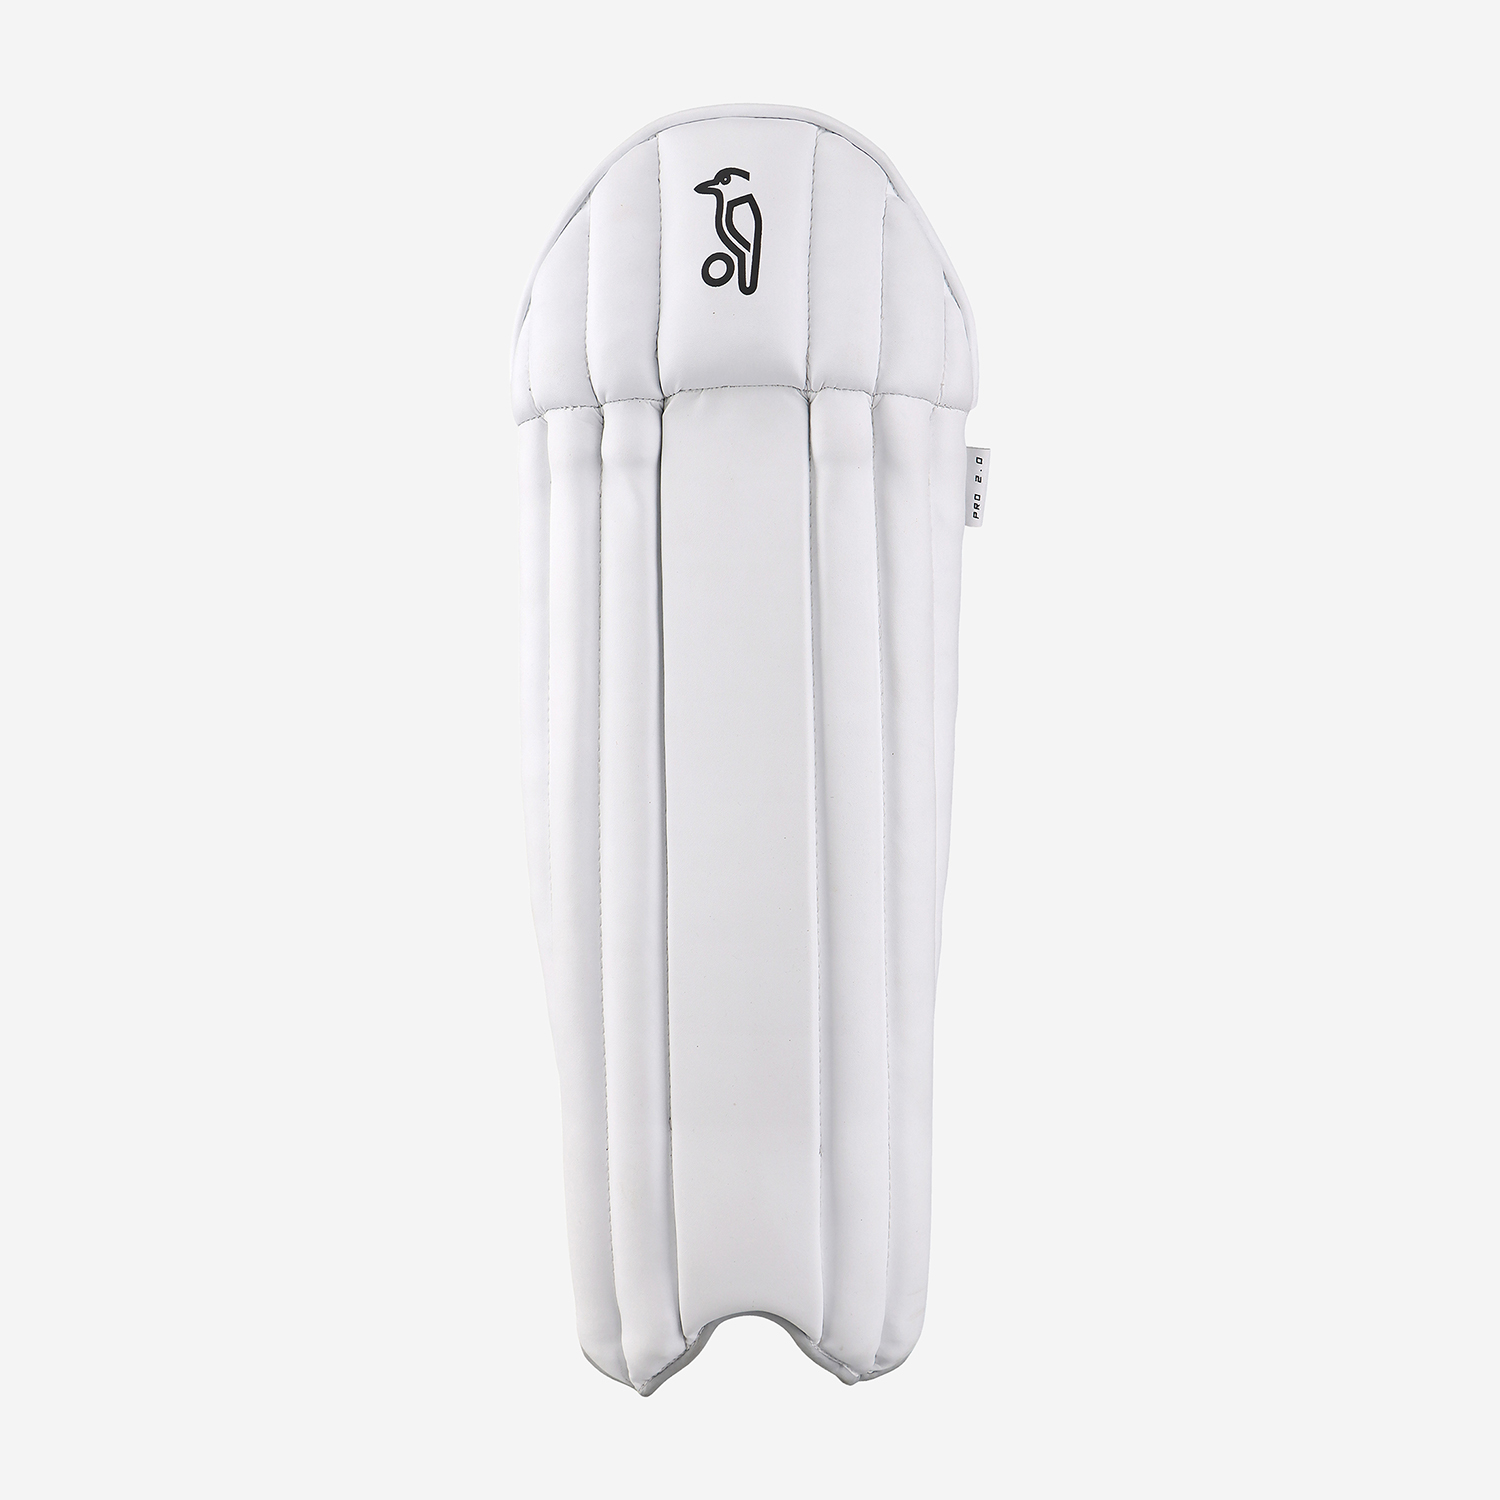 Pro 2.0 Wicket Keeping Pads